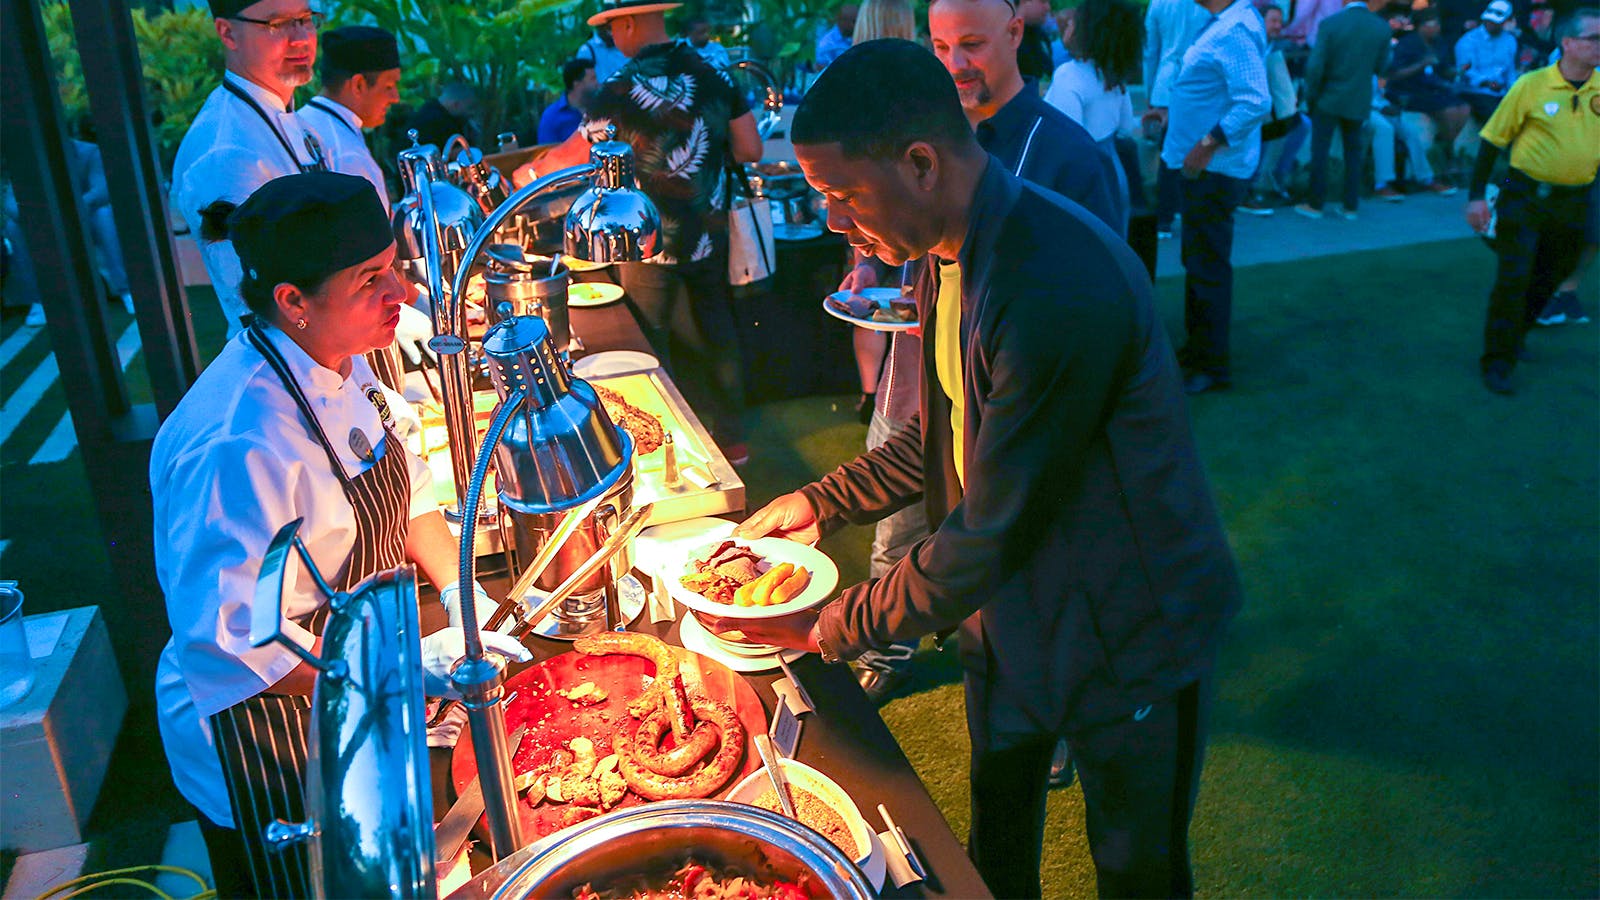 The food was as plentiful as the cigars and drinks, with sausages and flank steaks roasting on open-fire grills all night while servers at carving stations piled up as much beef as a plate could hold.